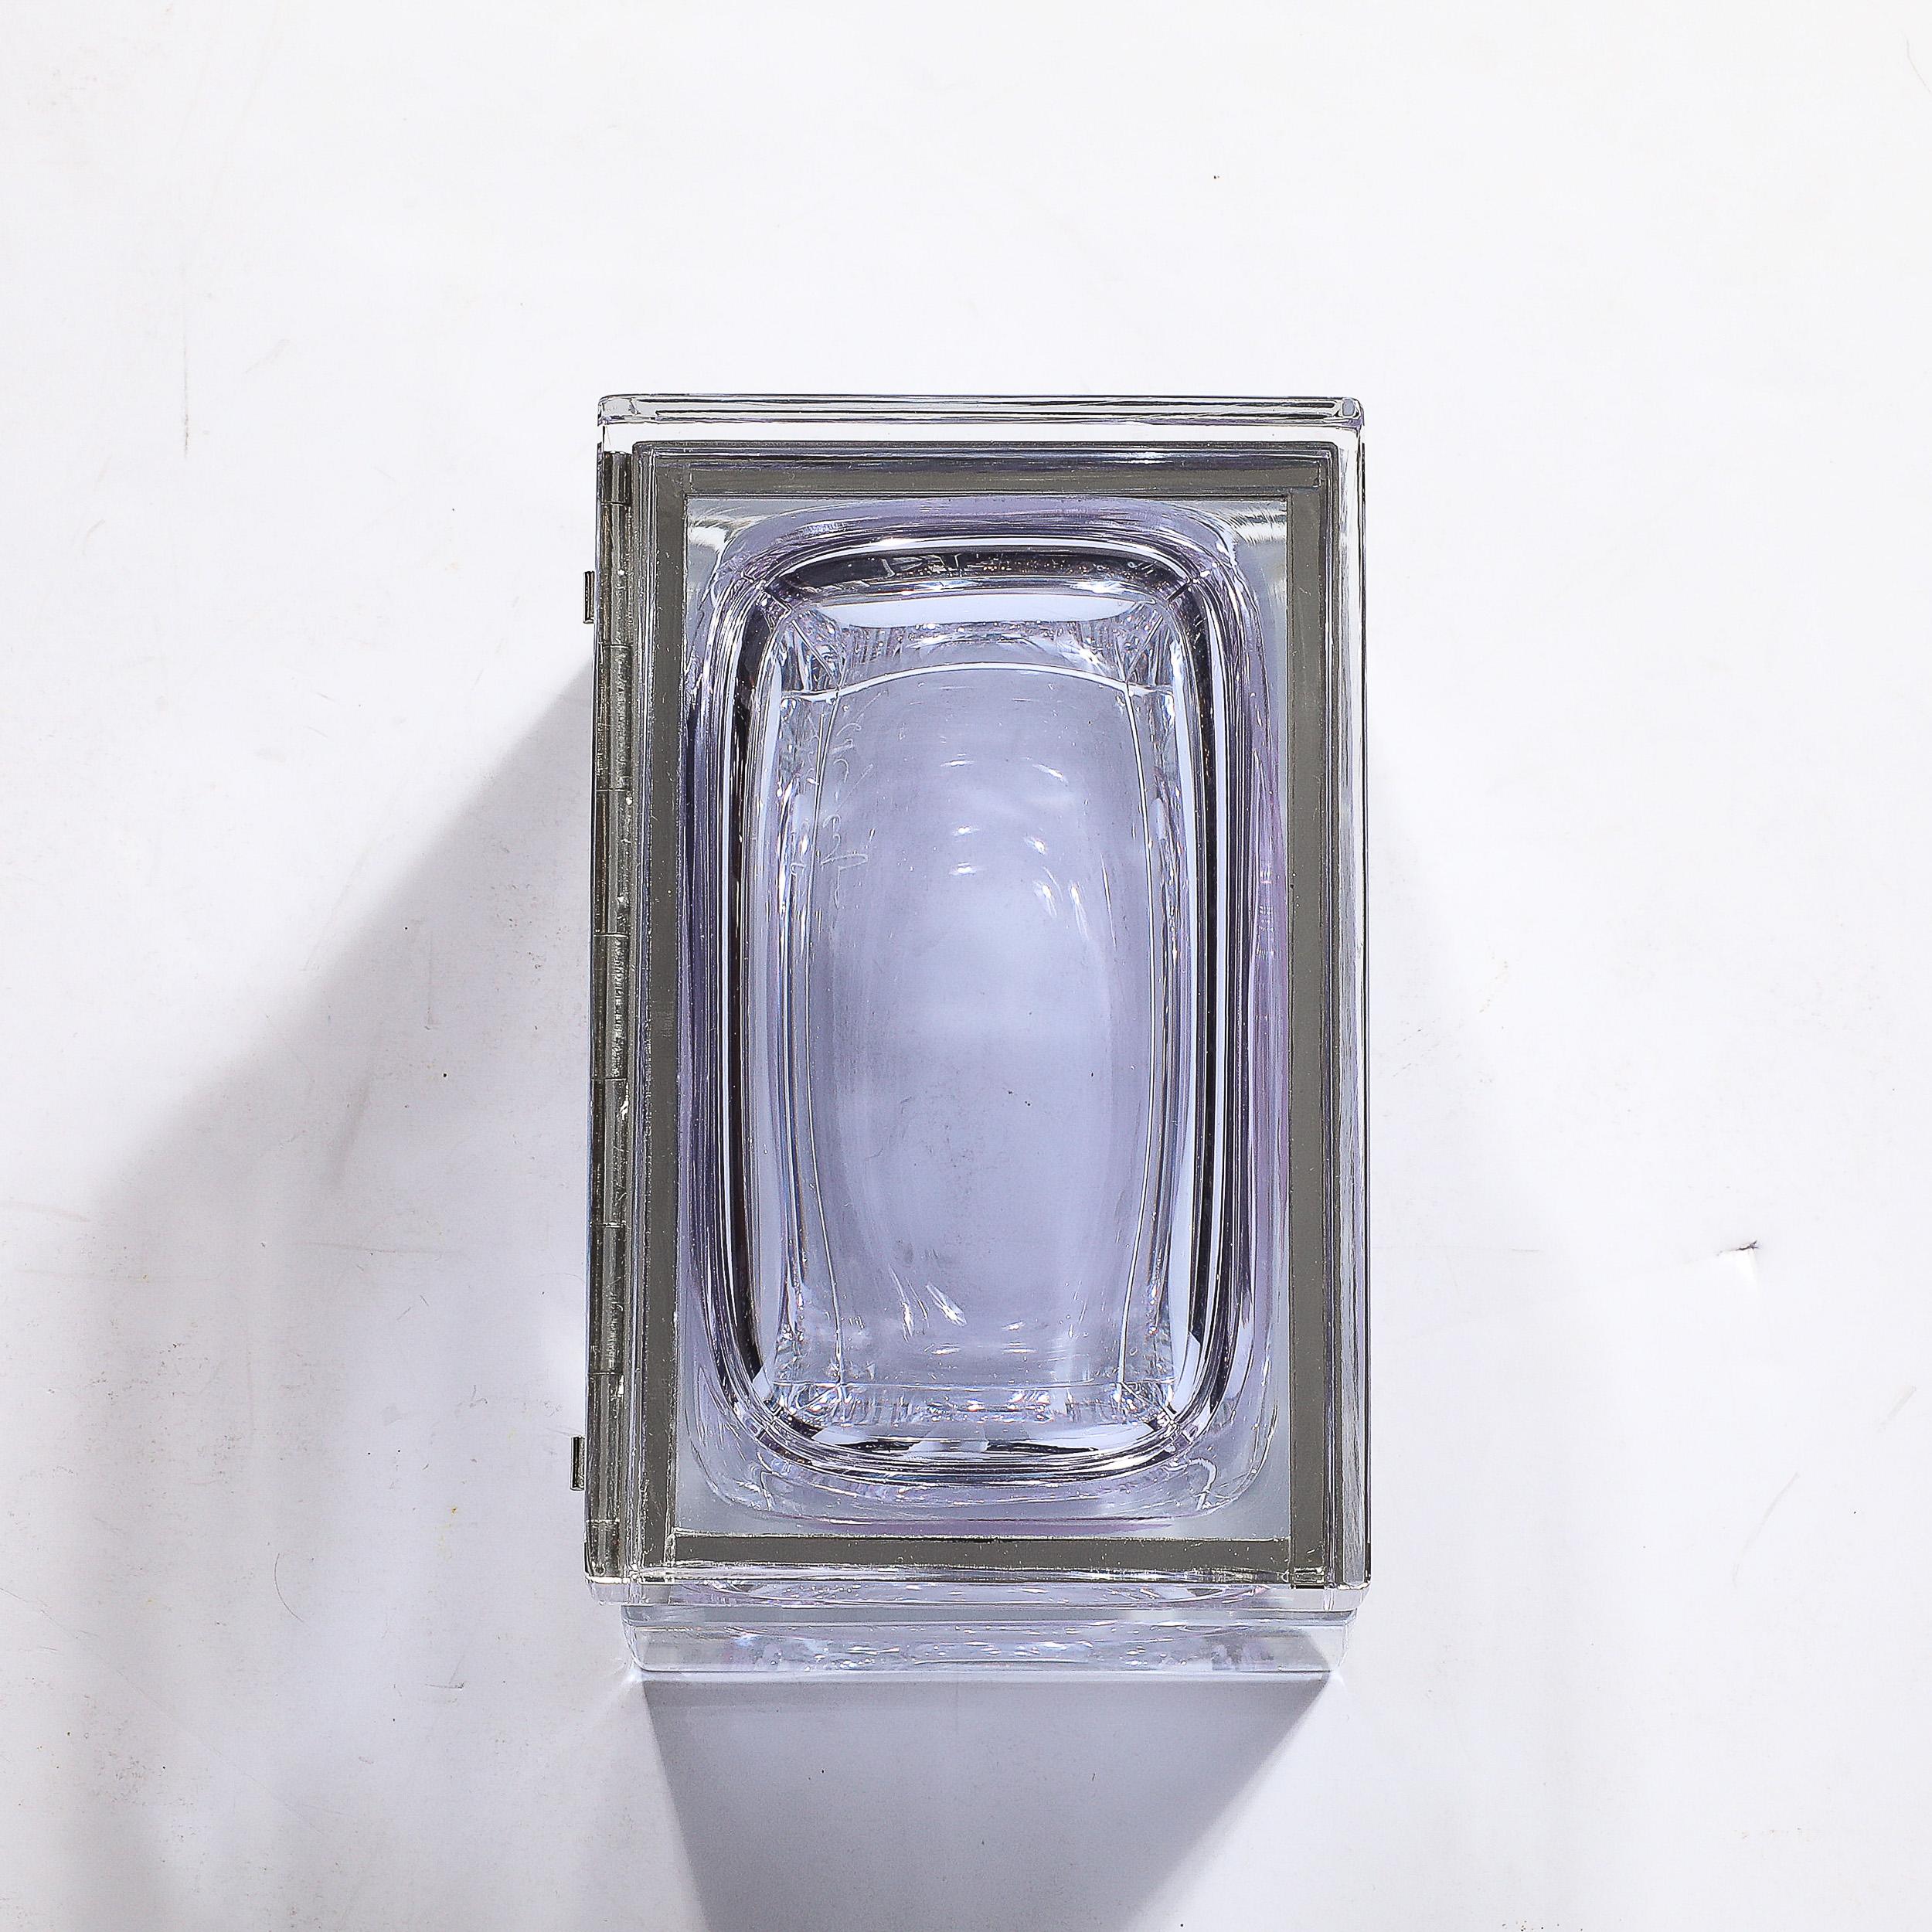 Modernist Hand-Blown Murano Glass Box in Lavender with Nickel Fittings For Sale 7